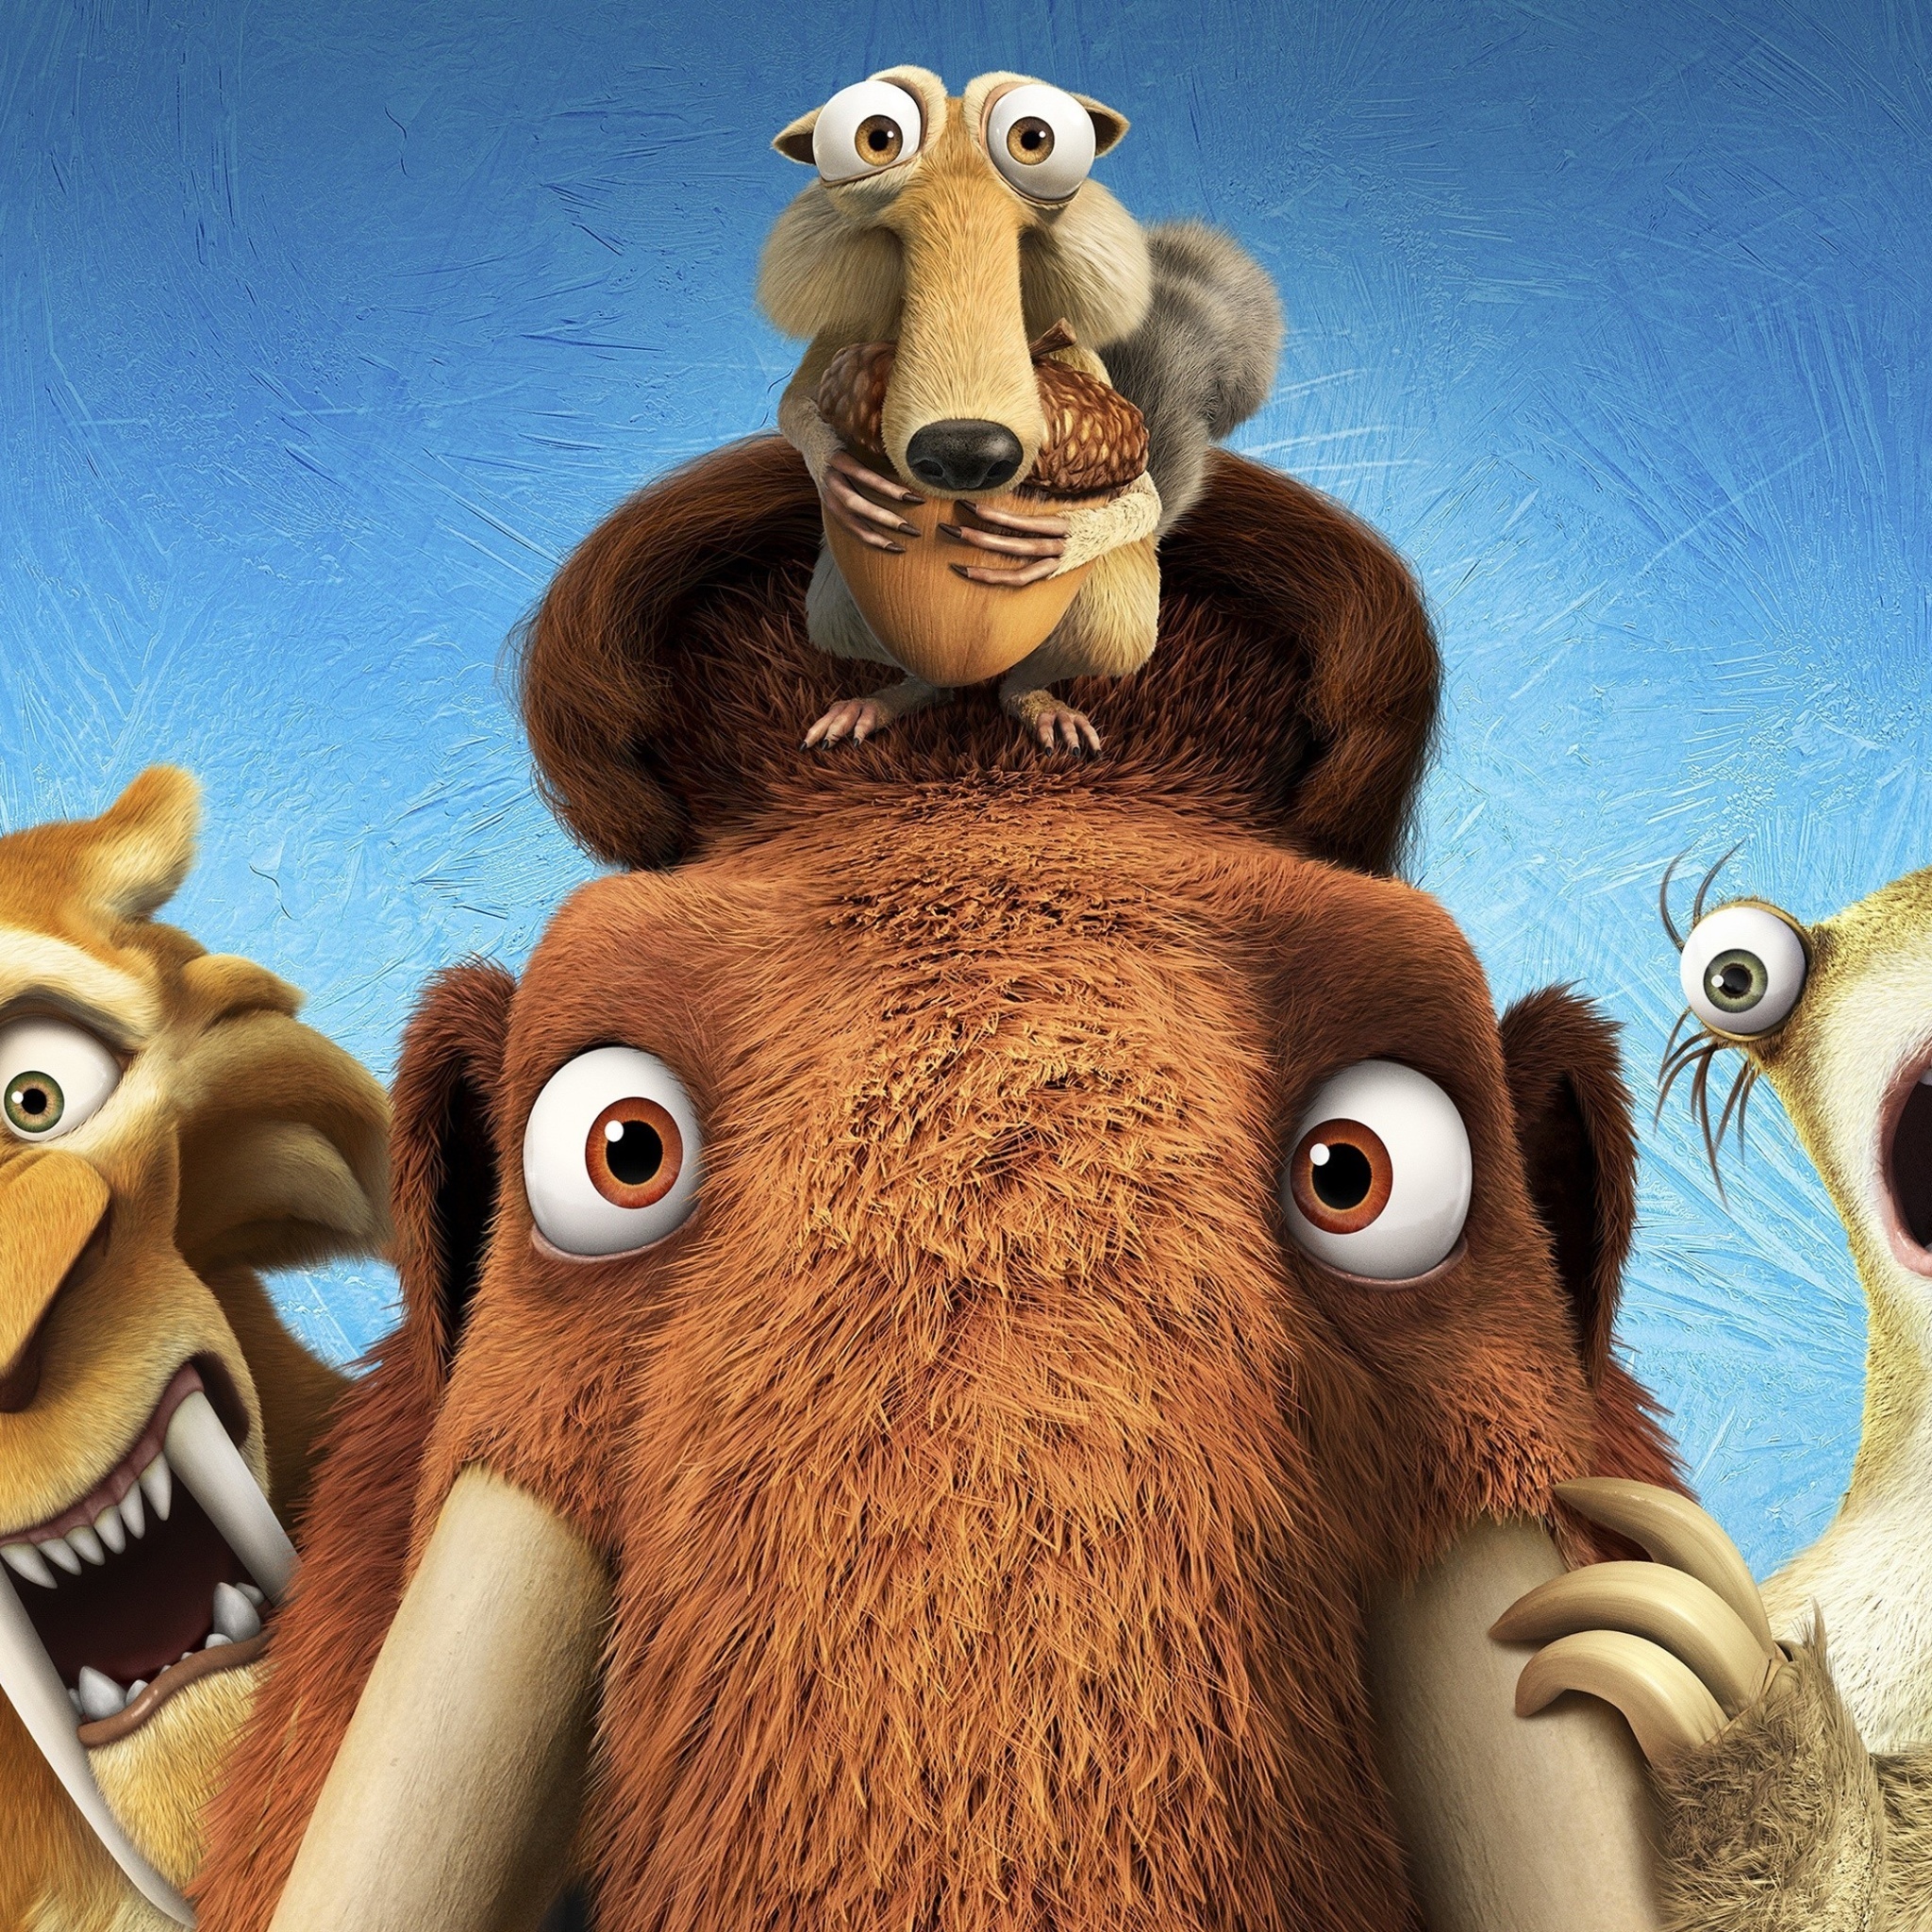 Ice Age 5 Collision Course with Diego, Manny, Scrat, Sid, Mammoths wallpaper 2048x2048